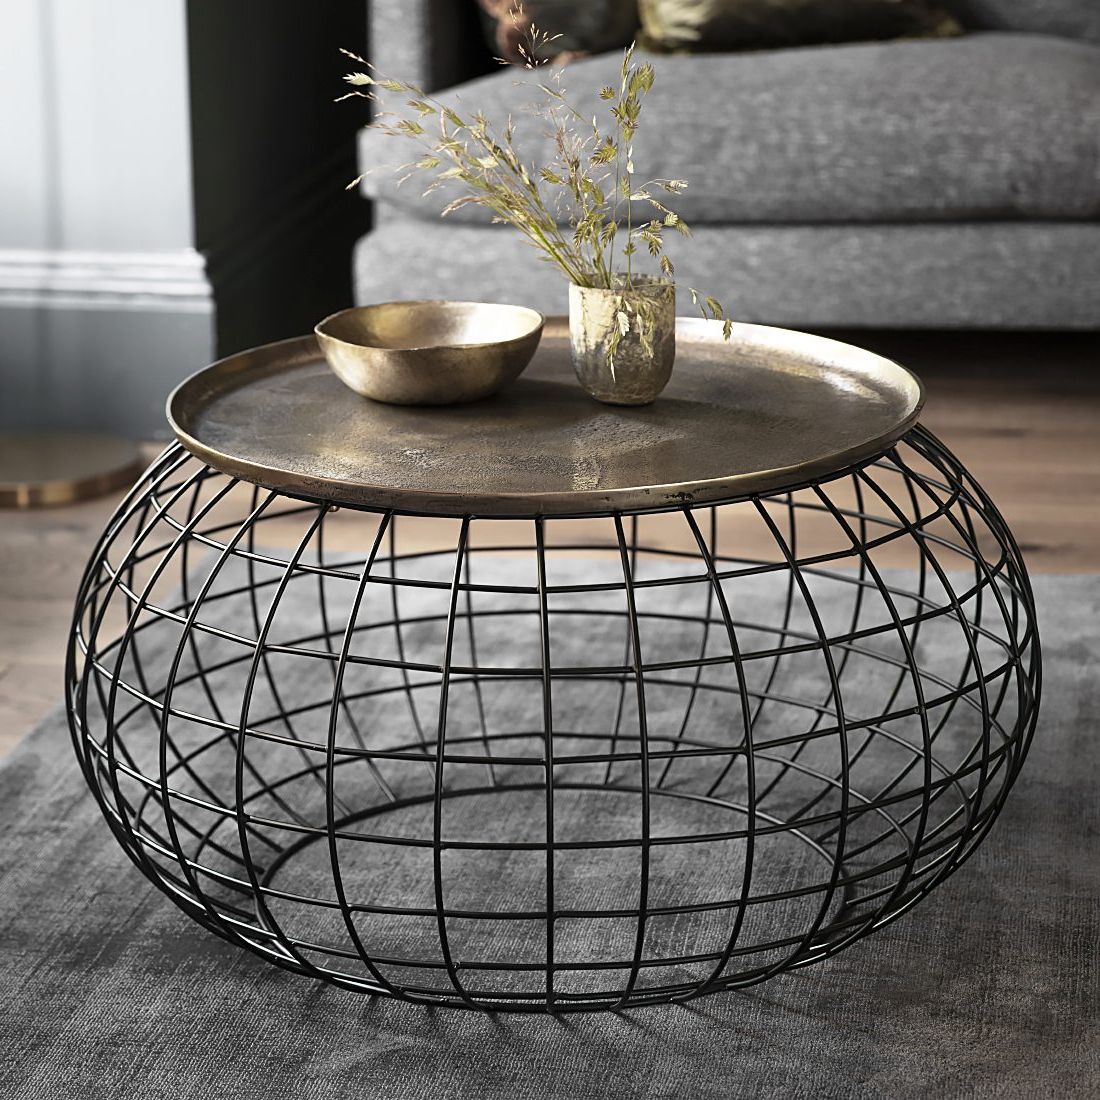 Most Popular Antique Brass Aluminum Round Coffee Tables Inside Round Metal Cage Coffee Table With Gold Tray Top (View 14 of 20)